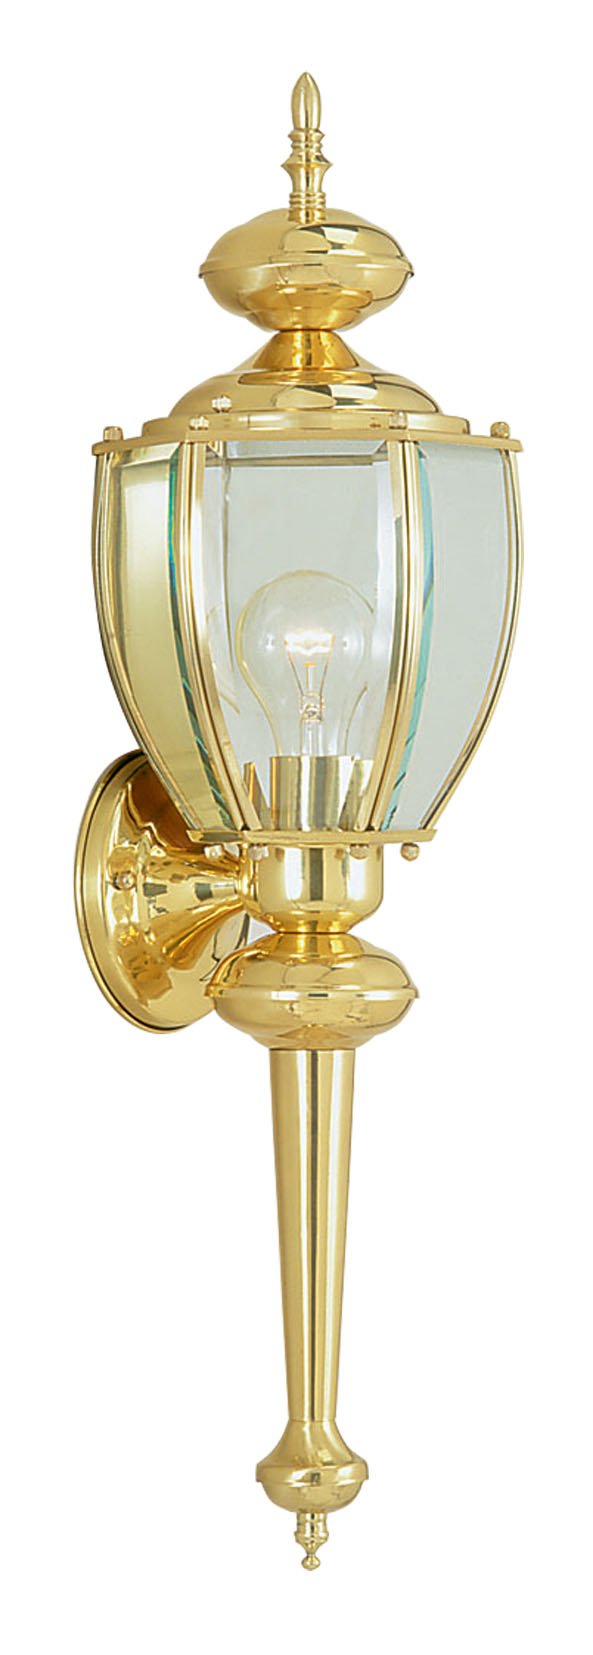 Livex Lighting 2112-02 Outdoor Wall Lantern with Clear Beveled Glass Shades, Polished Brass